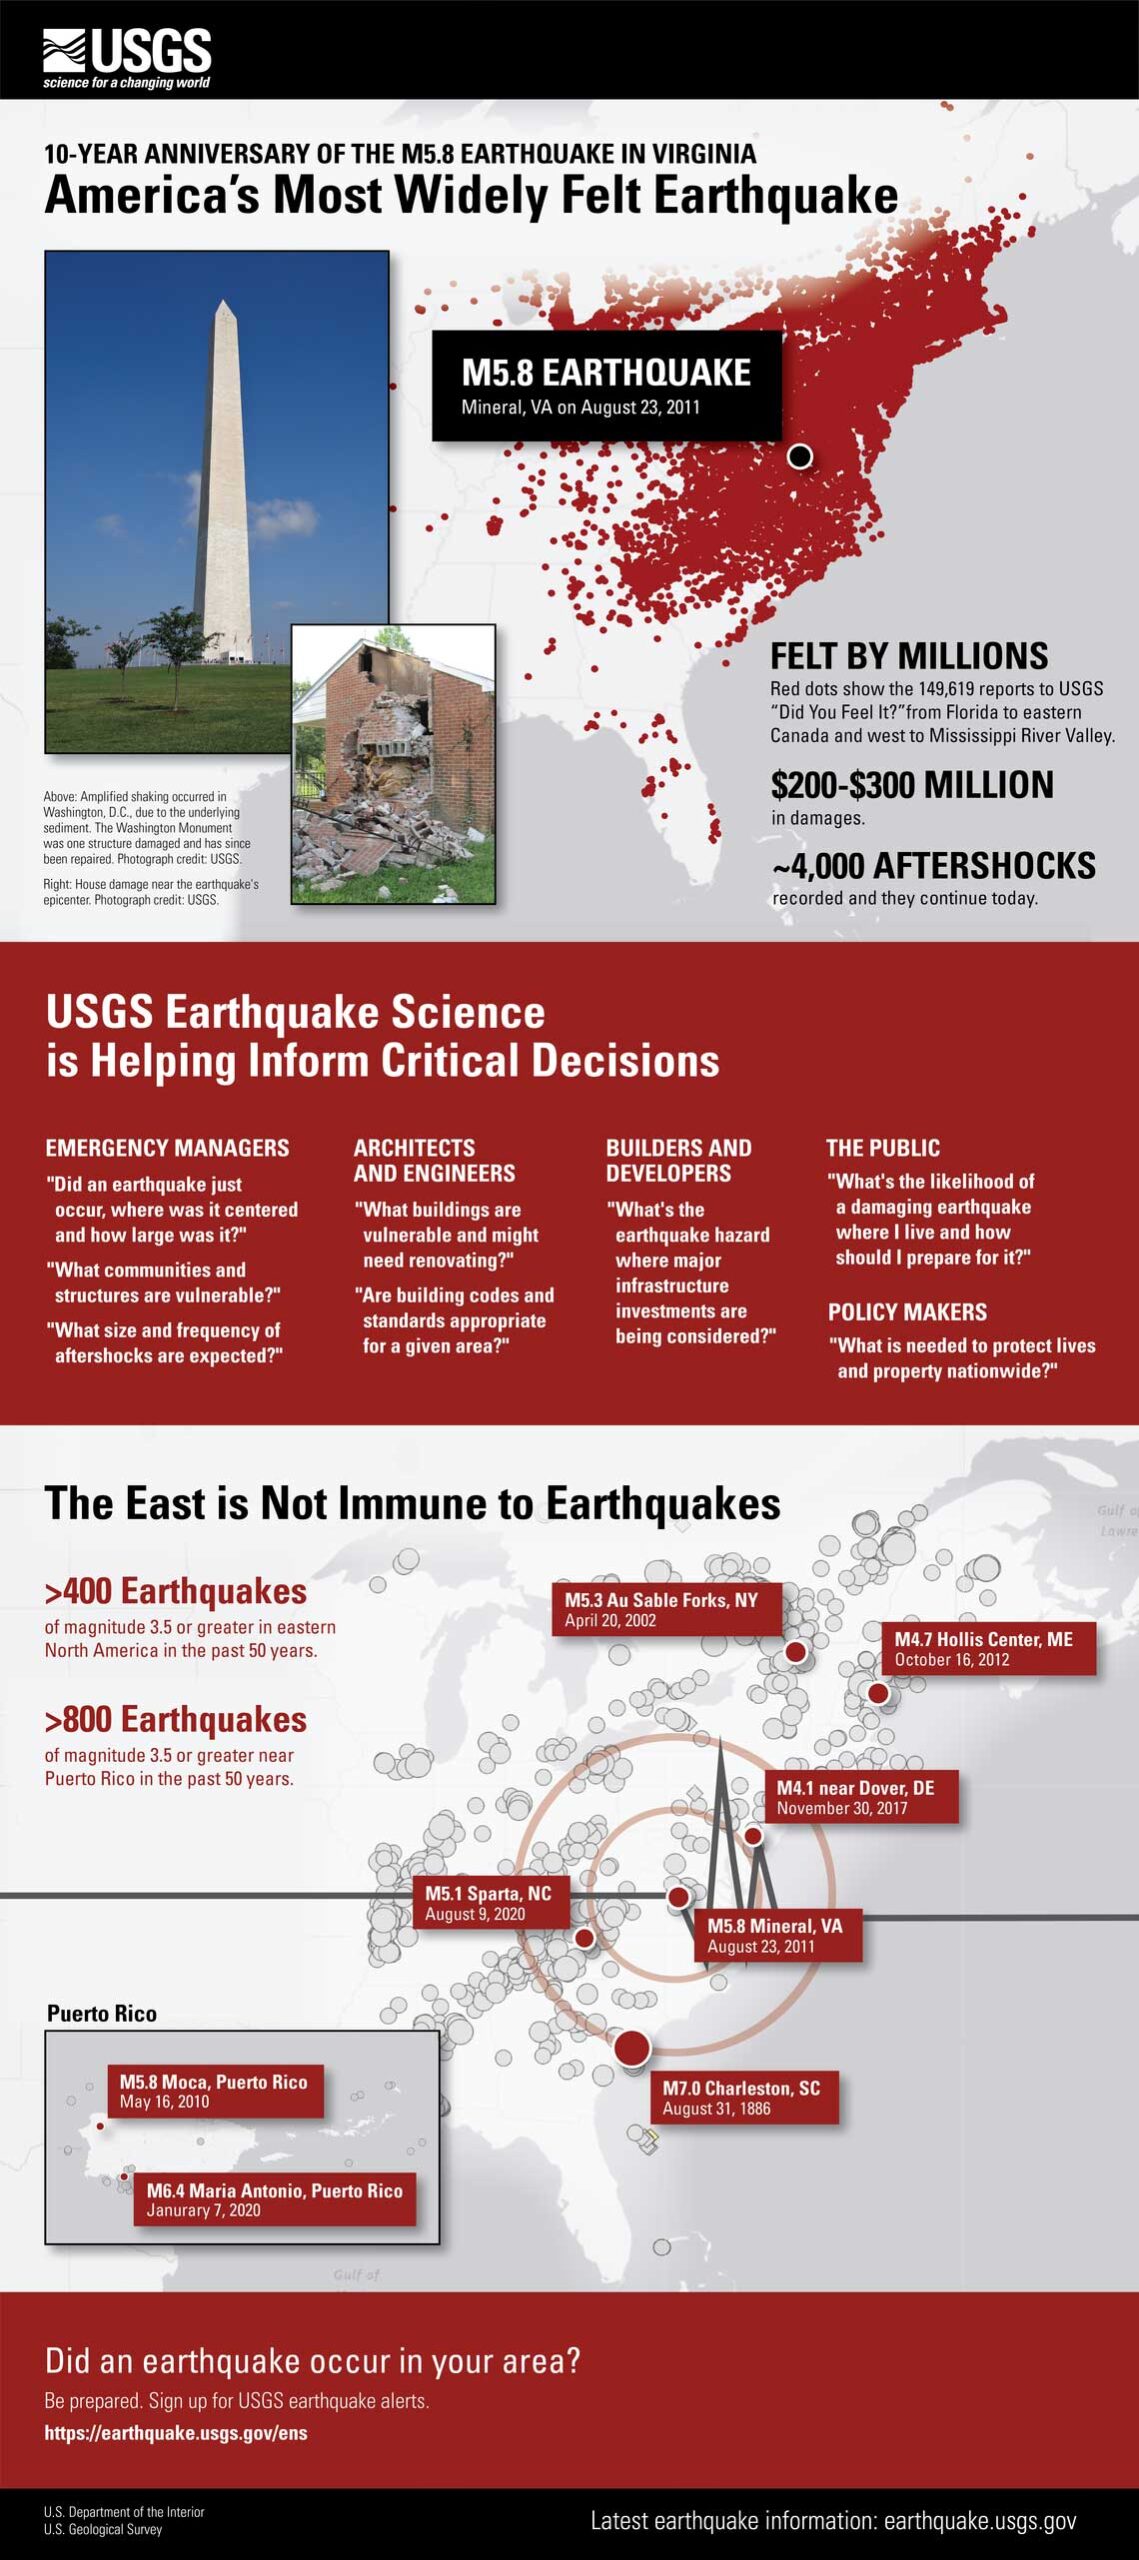 USGS infographic about the 2011 Virginia earthquake.